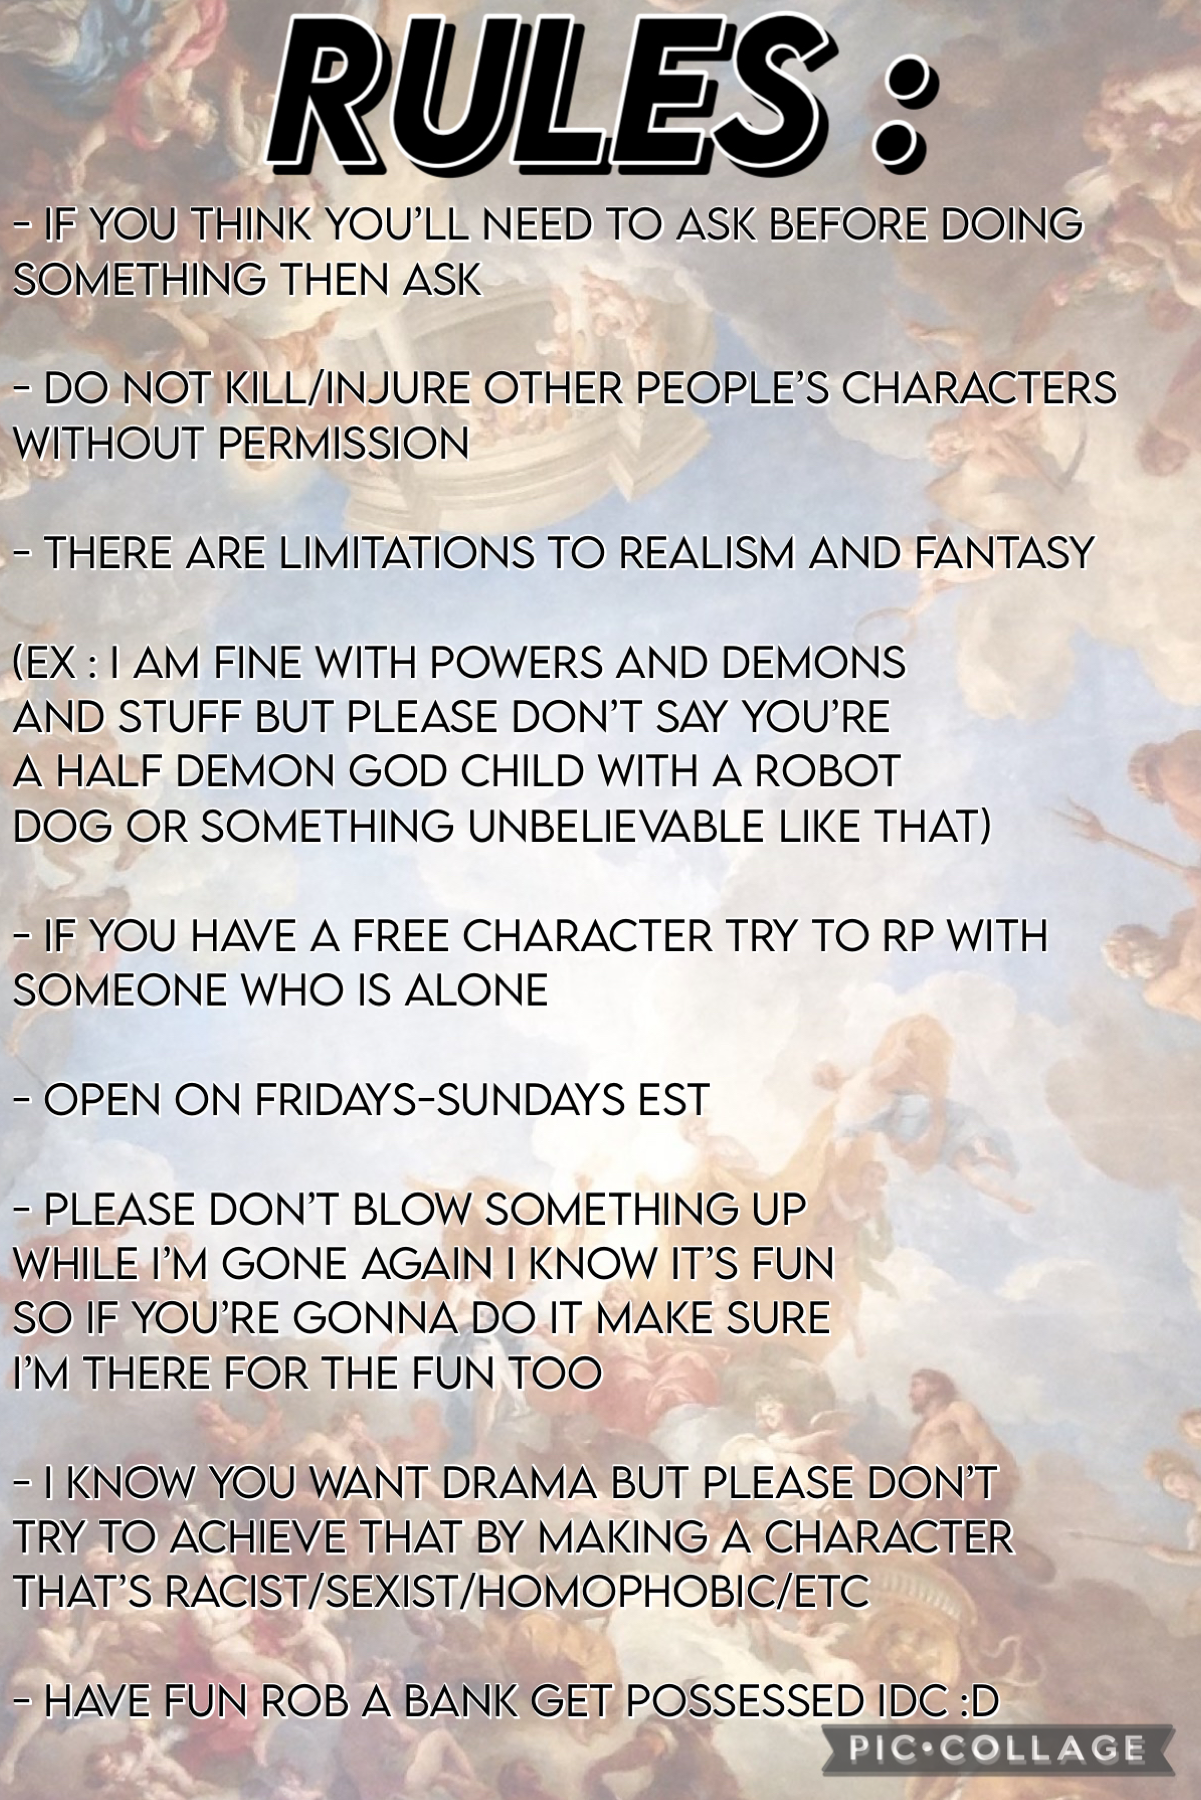 these are just some basic rules to make sure we all know are limitations and so we all have fun. 

but the biggest rules are include everyone and ask the person that would be affected before you do

SO HAVE FUNN!!